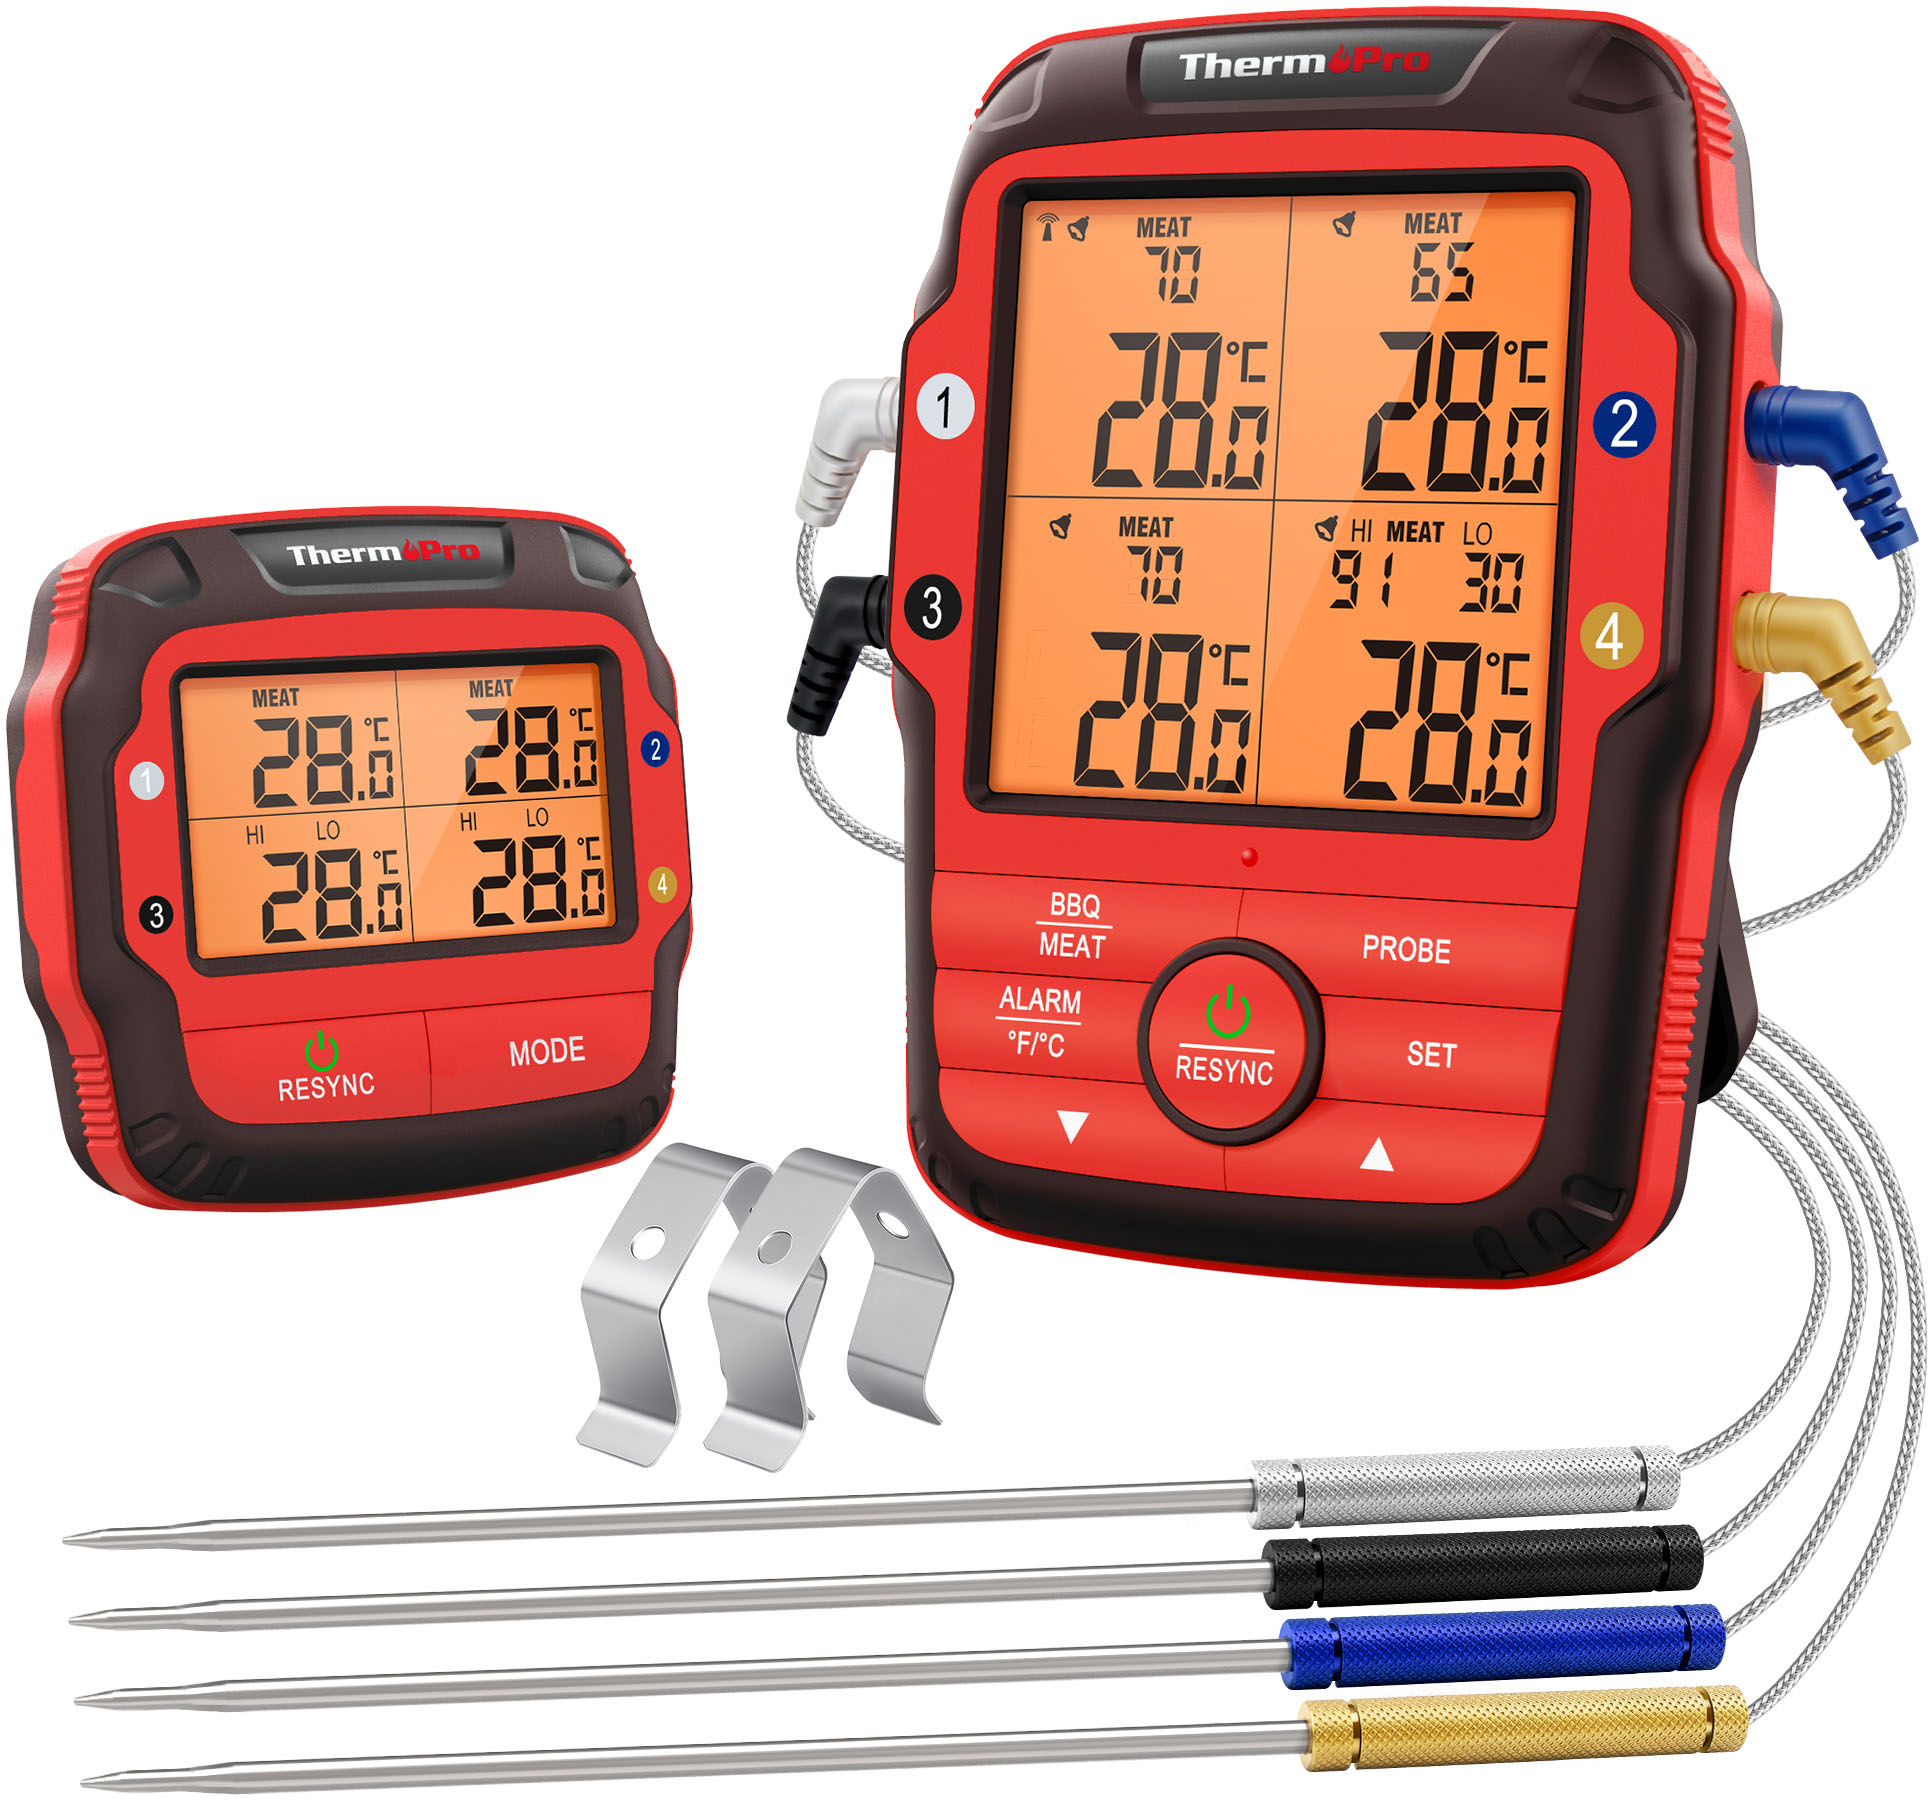 0810012961820 - THERMOPRO - LONG RANGE WIRELESS MEAT THERMOMETER WITH 4 PROBES - RED